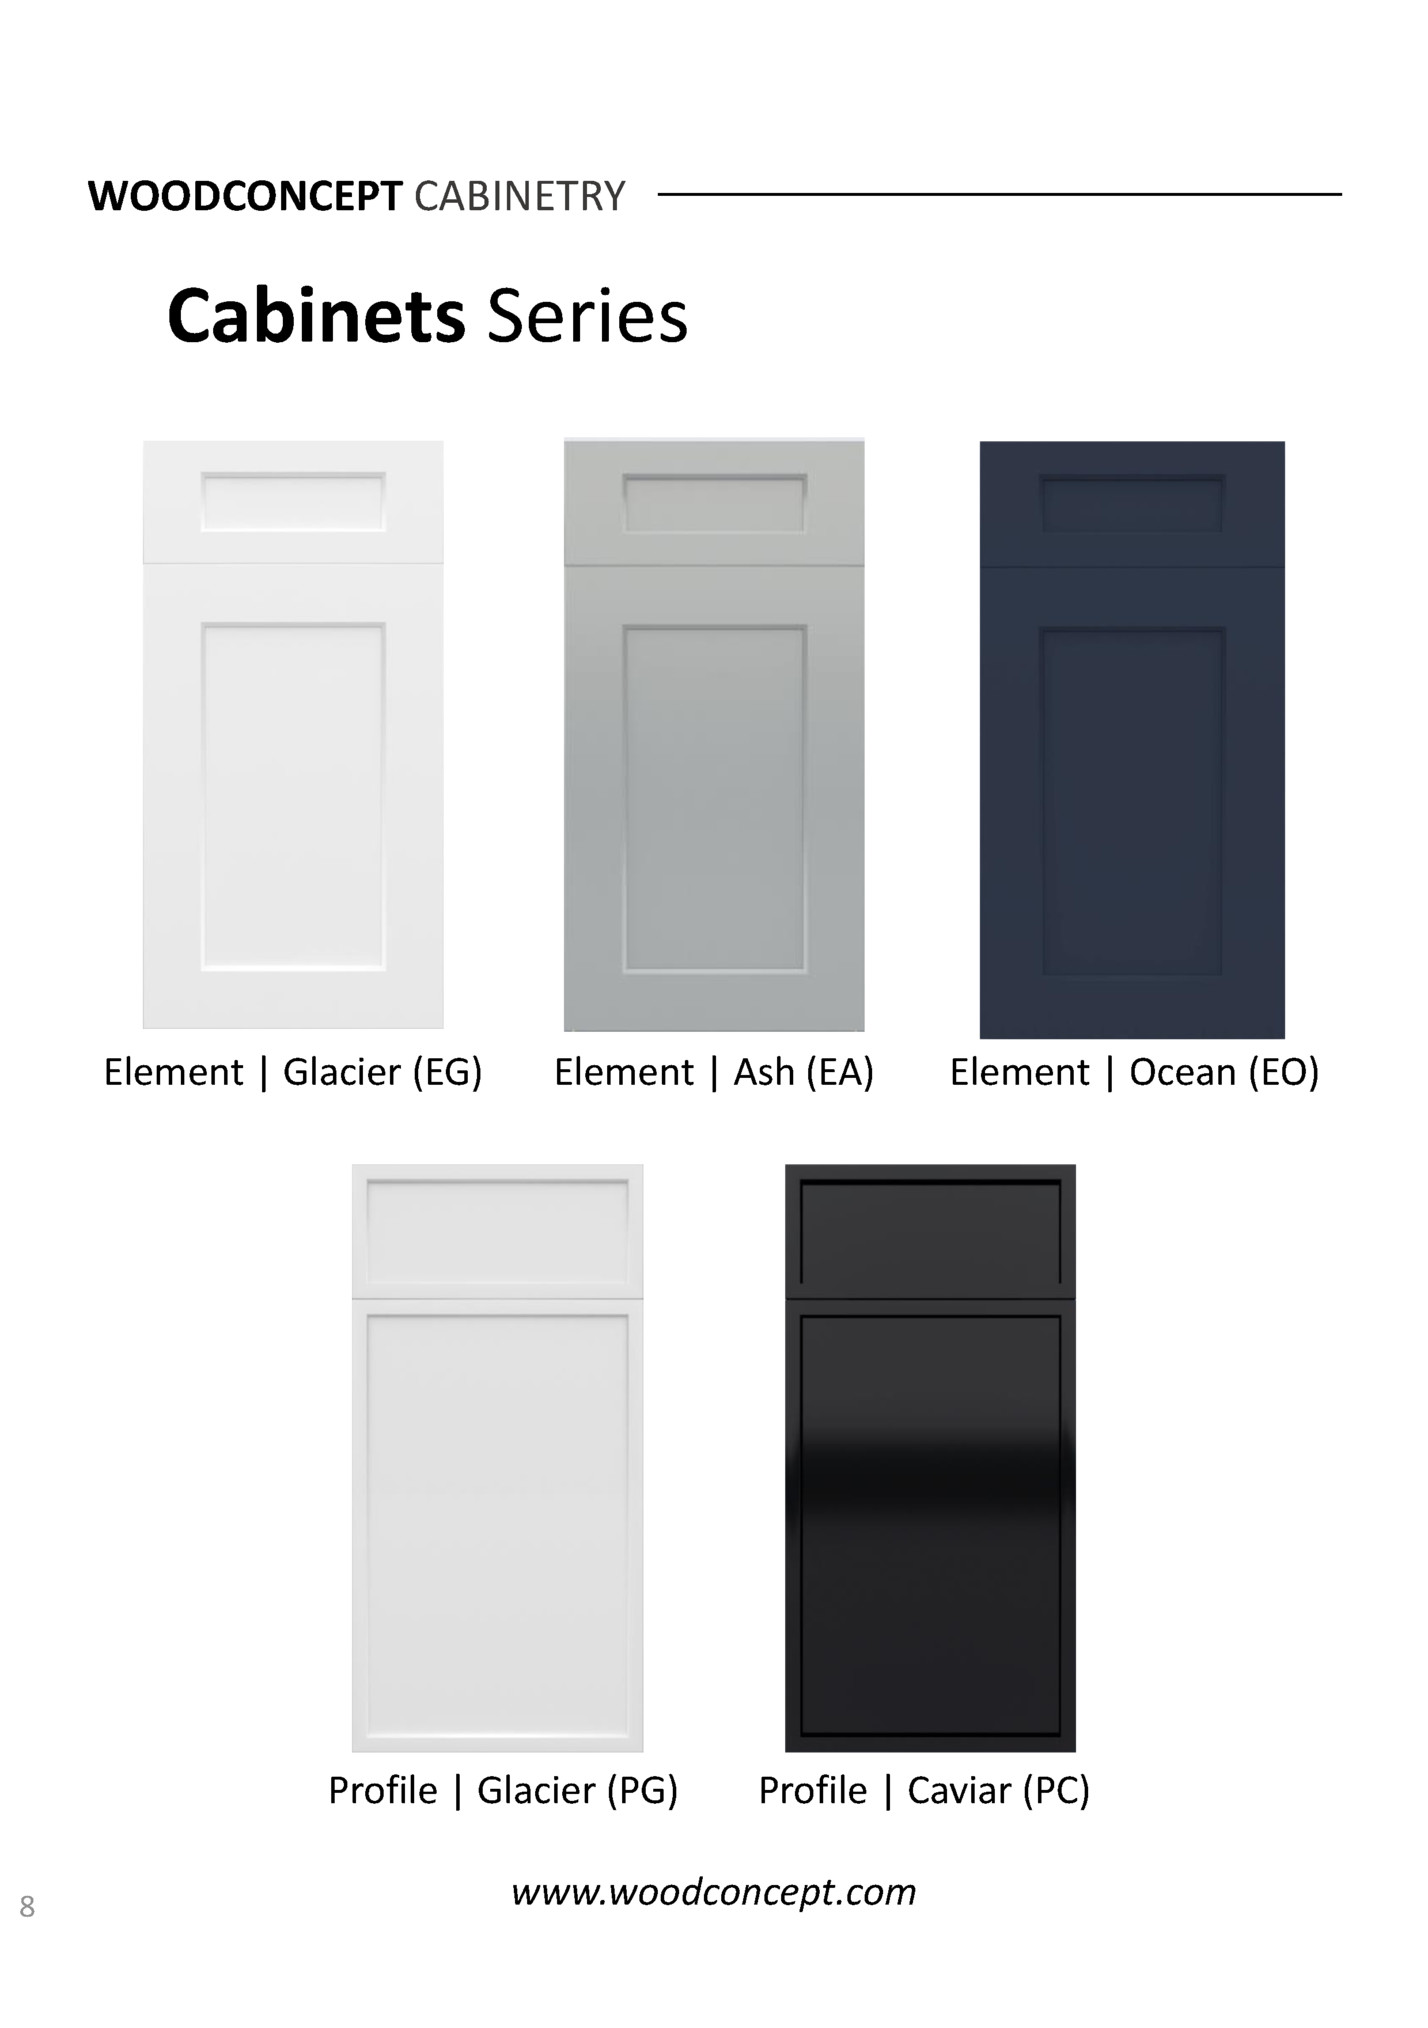 WOODCONCEPT CABINETRY